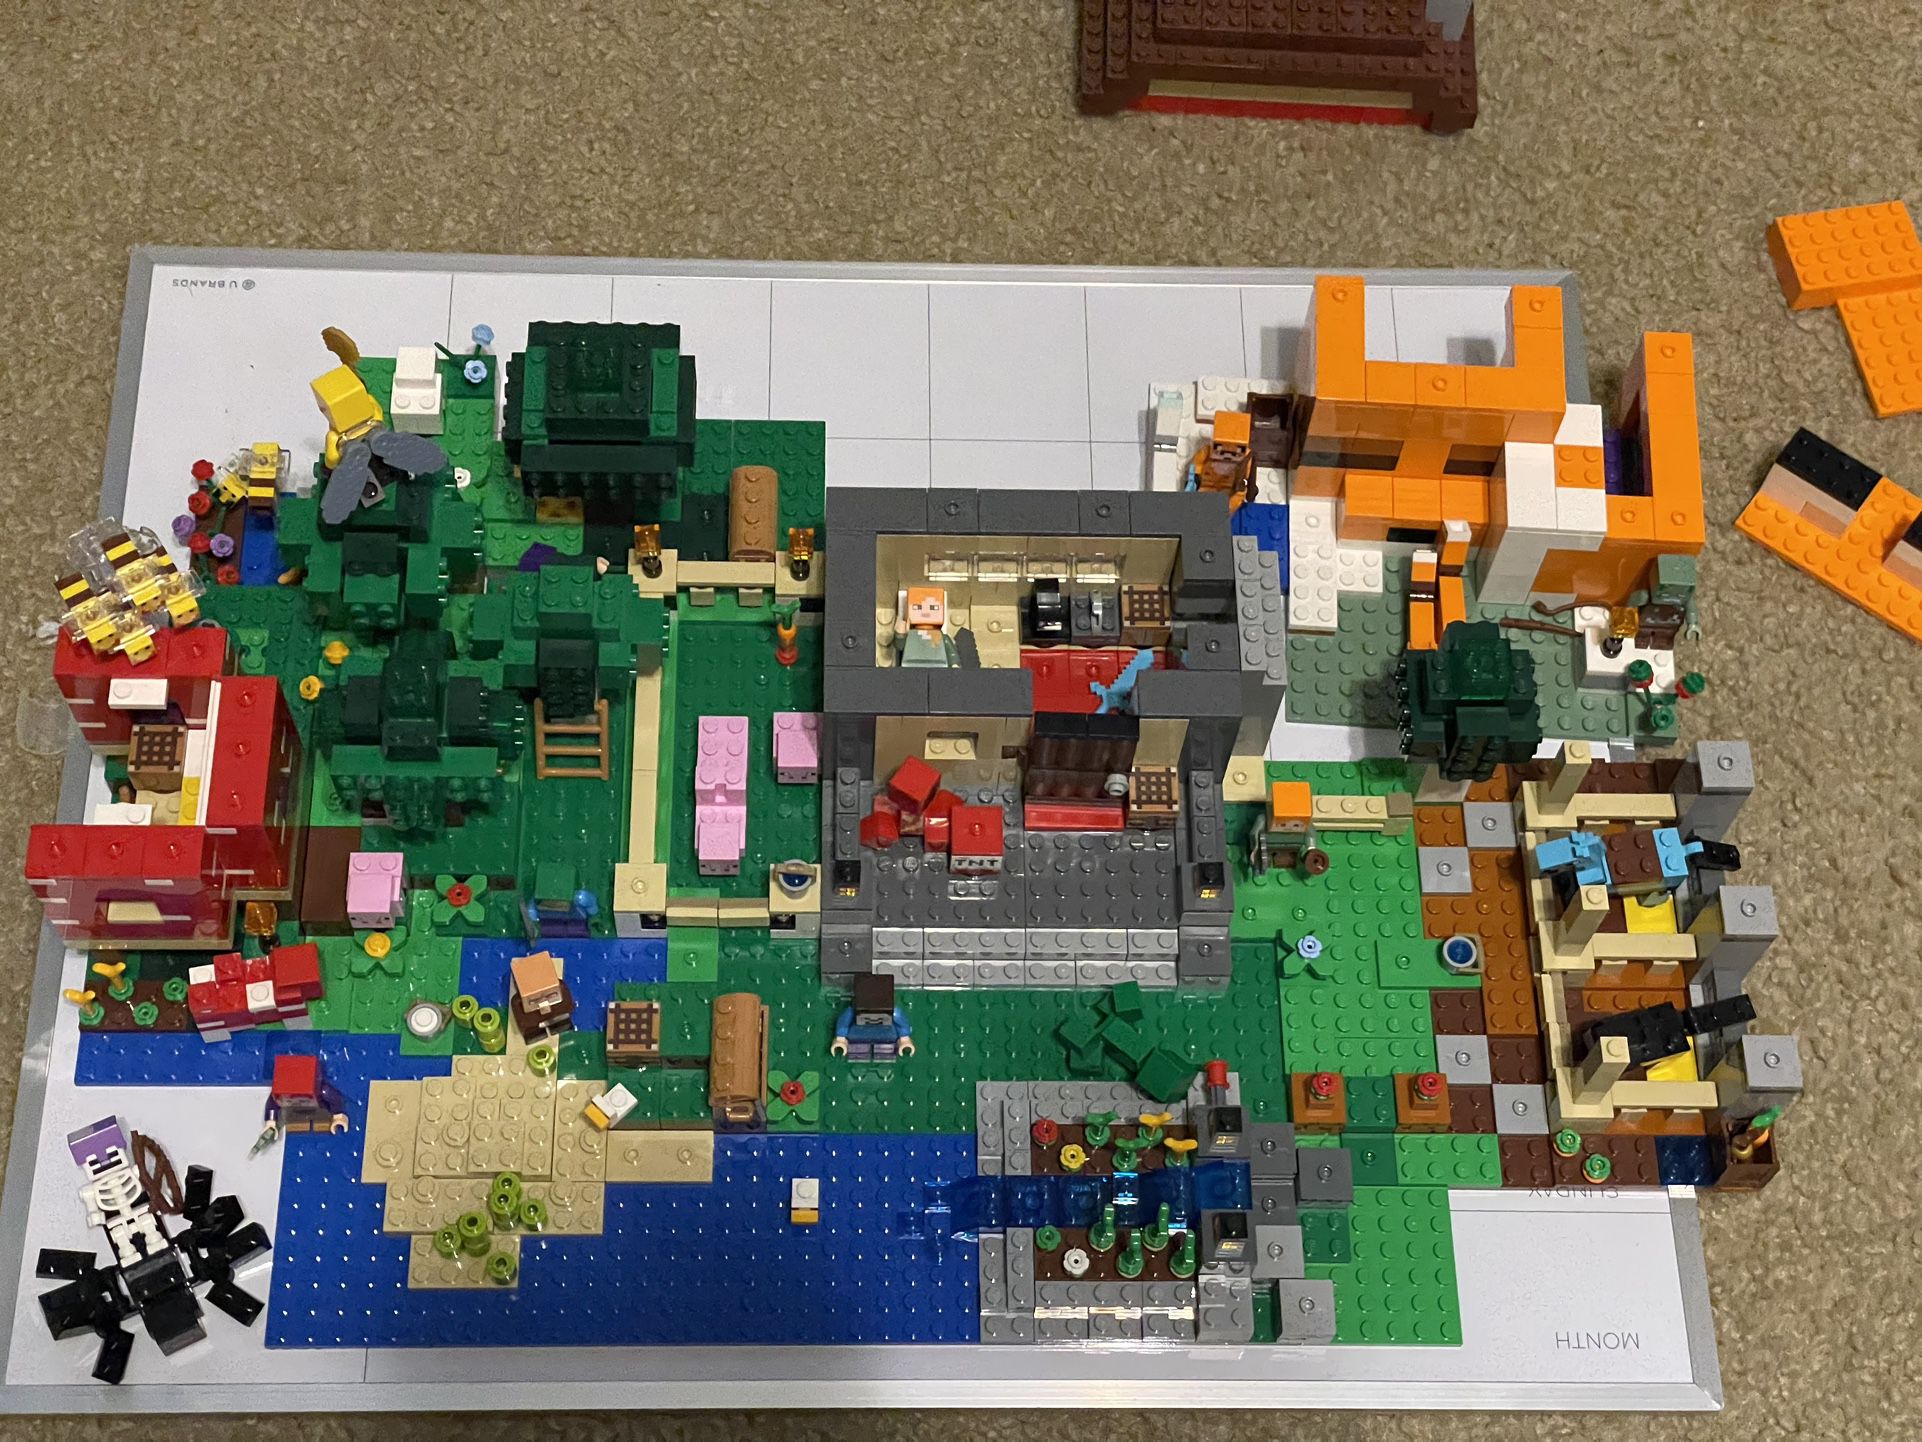 Minecraft LEGO #21117, the ender dragon for Sale in Woodland Hills, CA -  OfferUp